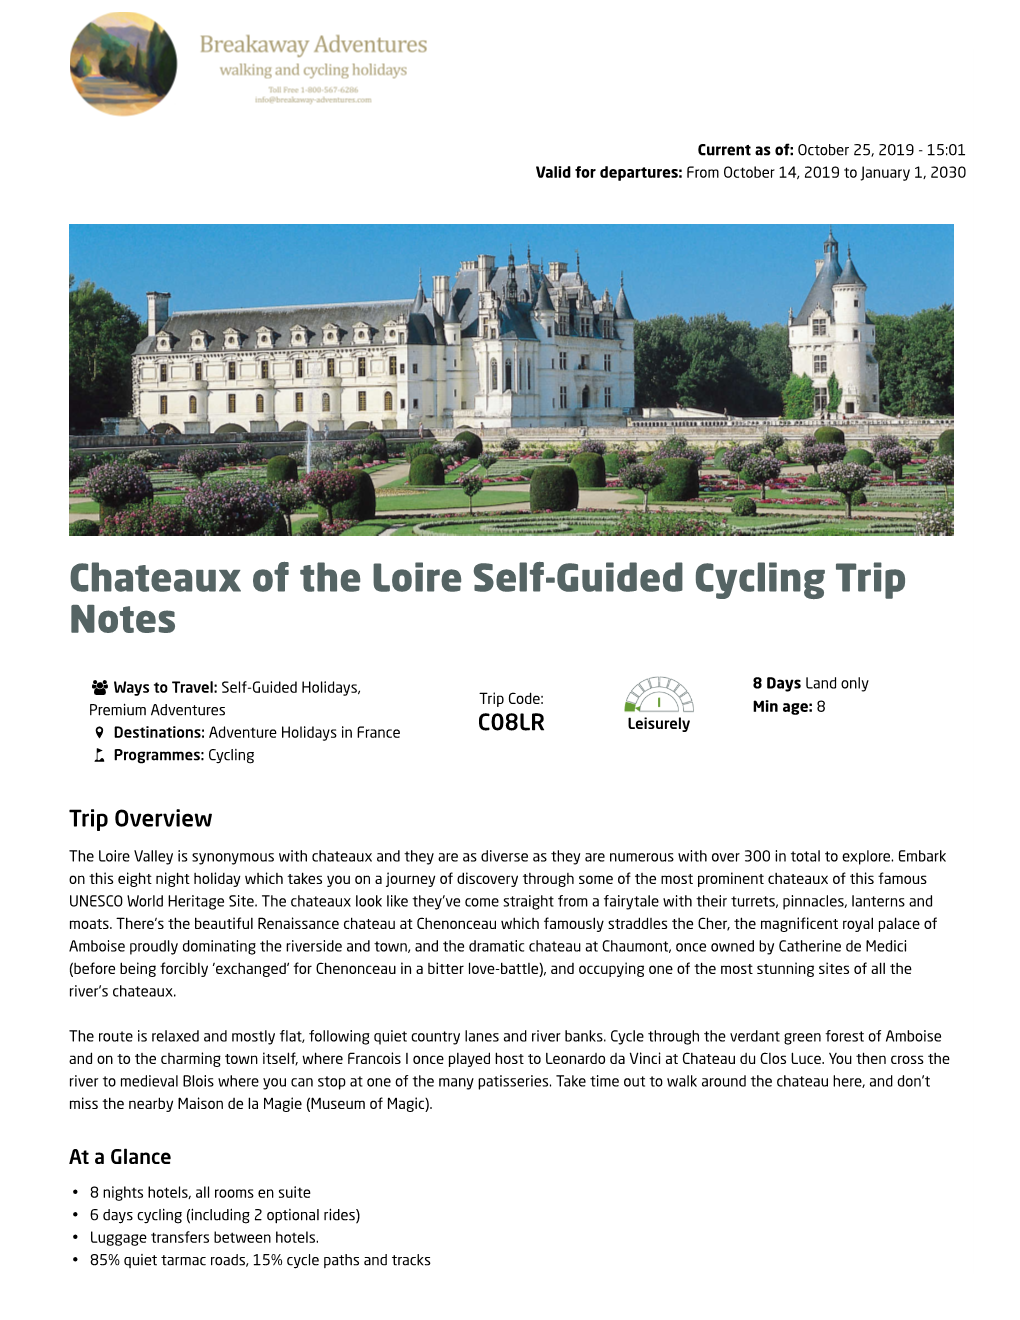 Chateaux of the Loire Self-Guided Cycling Trip Notes